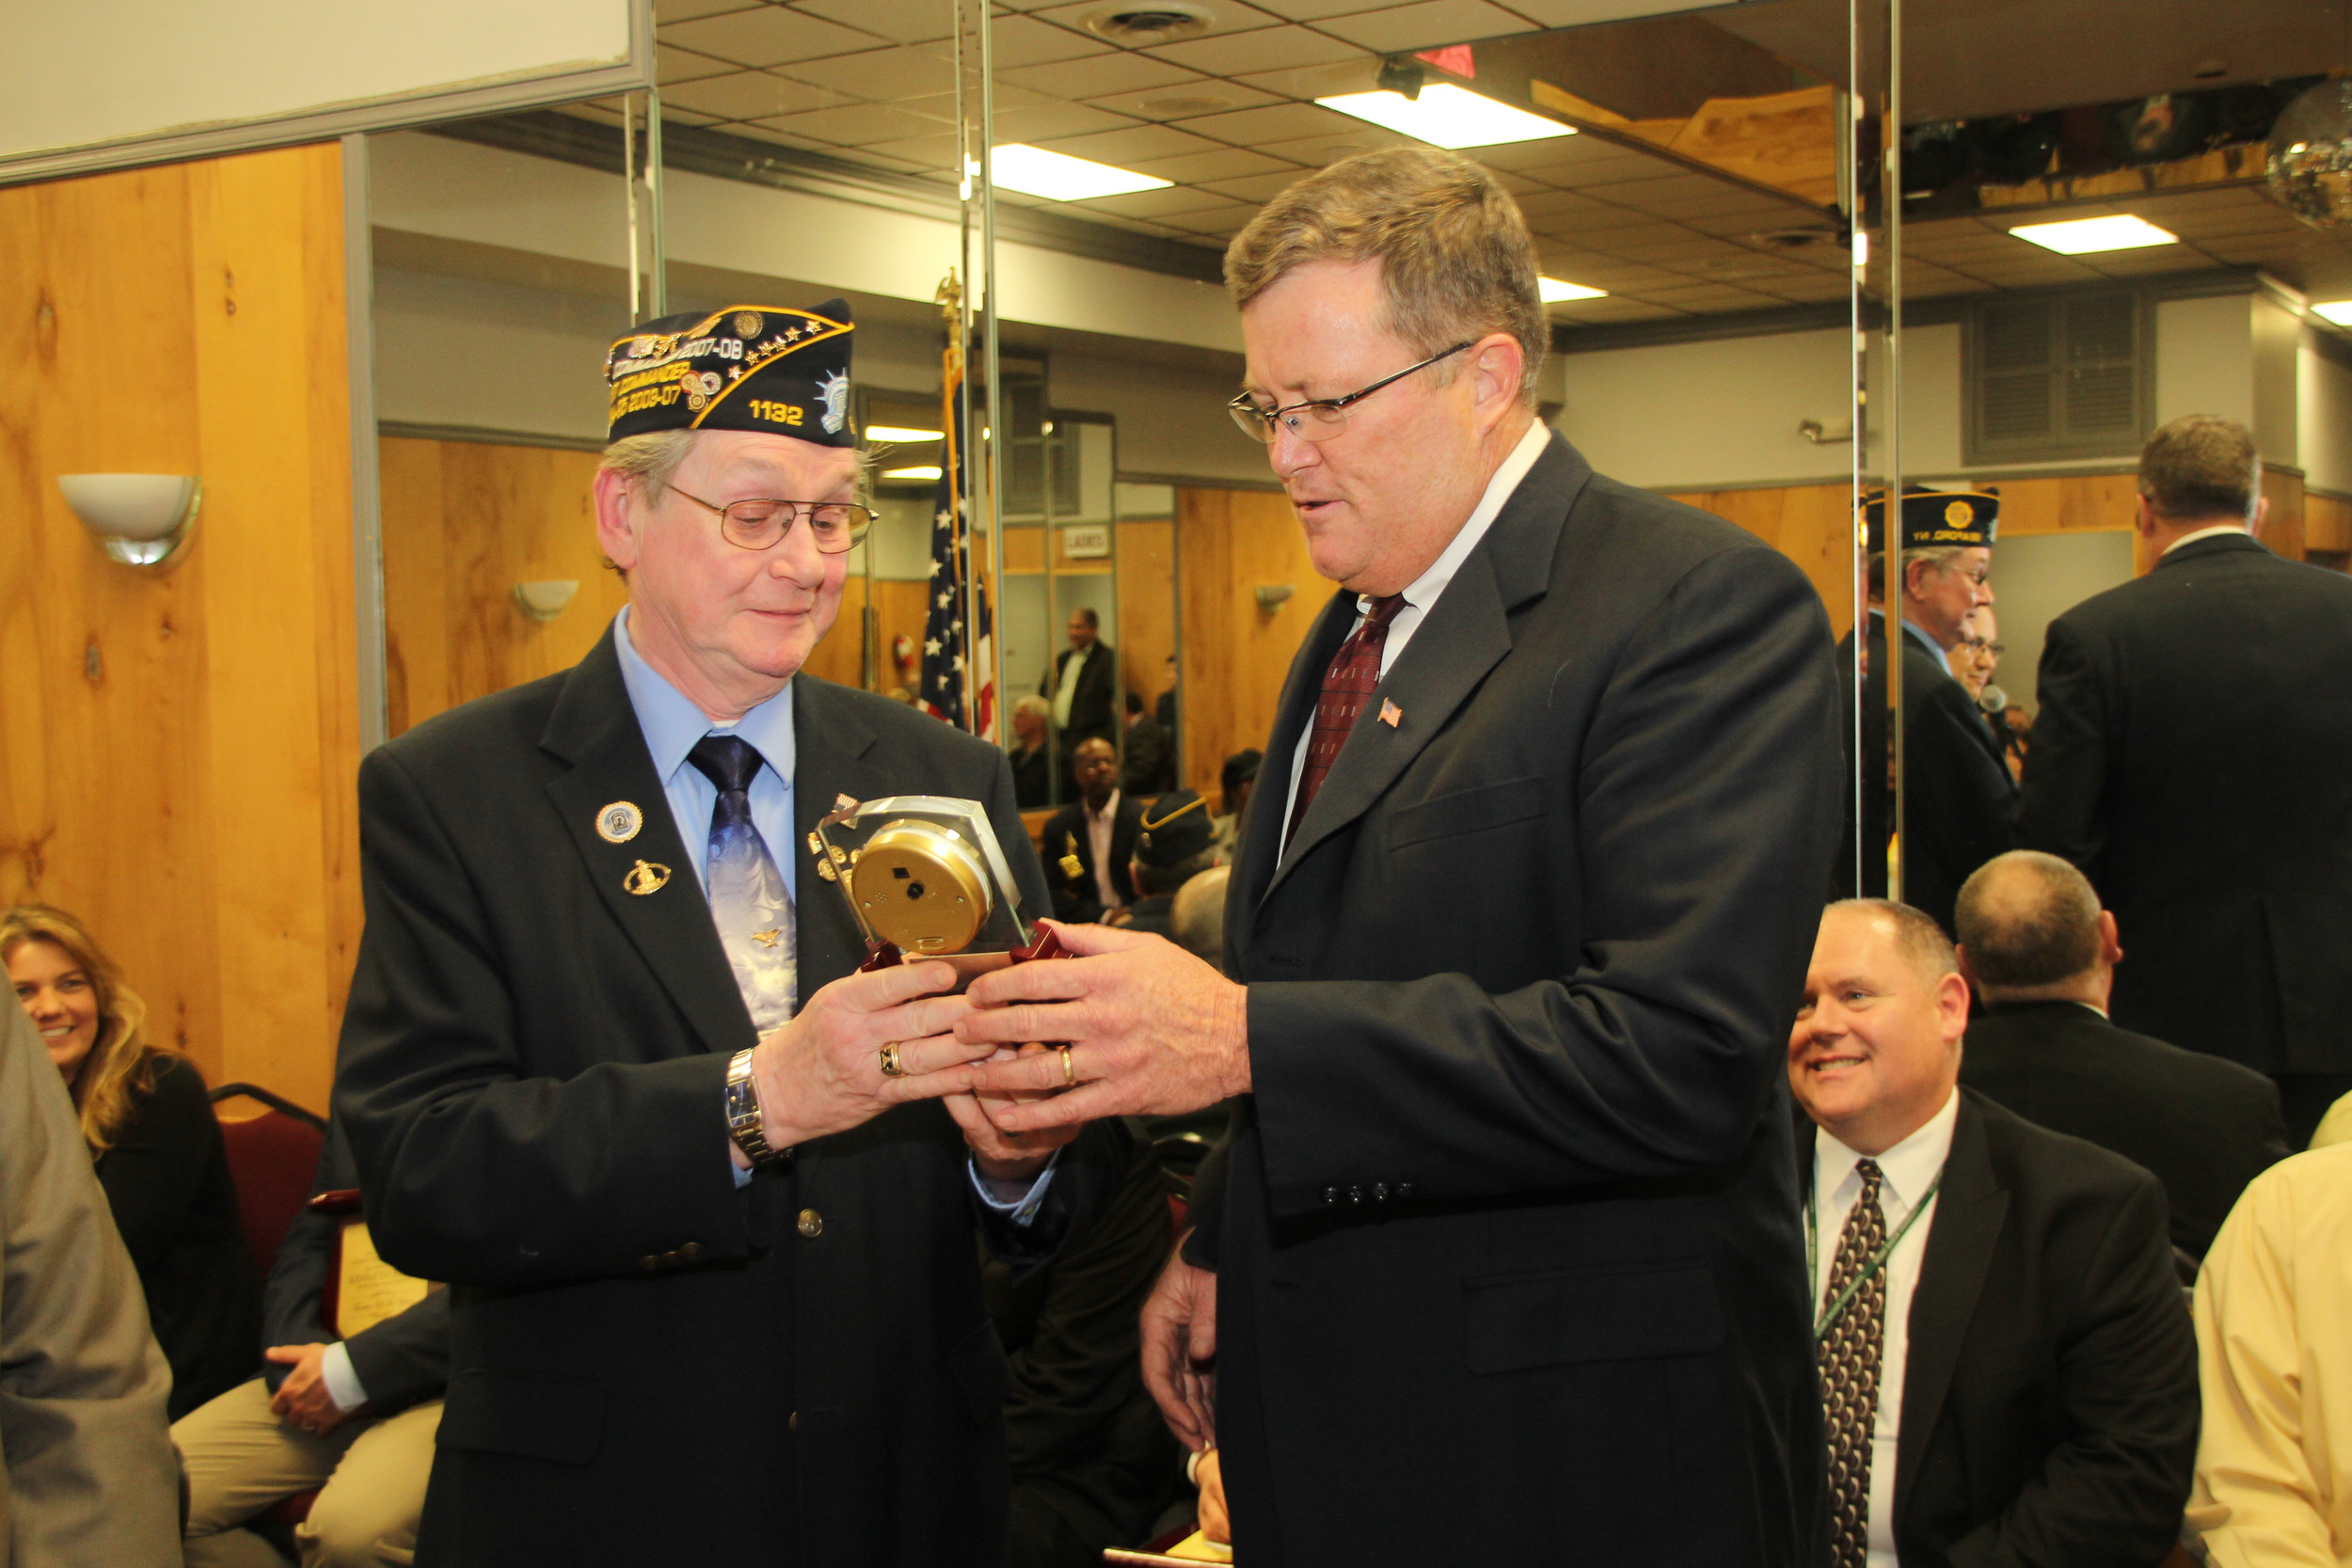 Bill Harms, commander of Seaford American Legion Post 1132, presented Brian Conboy with the group’s Special Recognition Award in April. Several community organizations honored Conboy before his retirement this month.